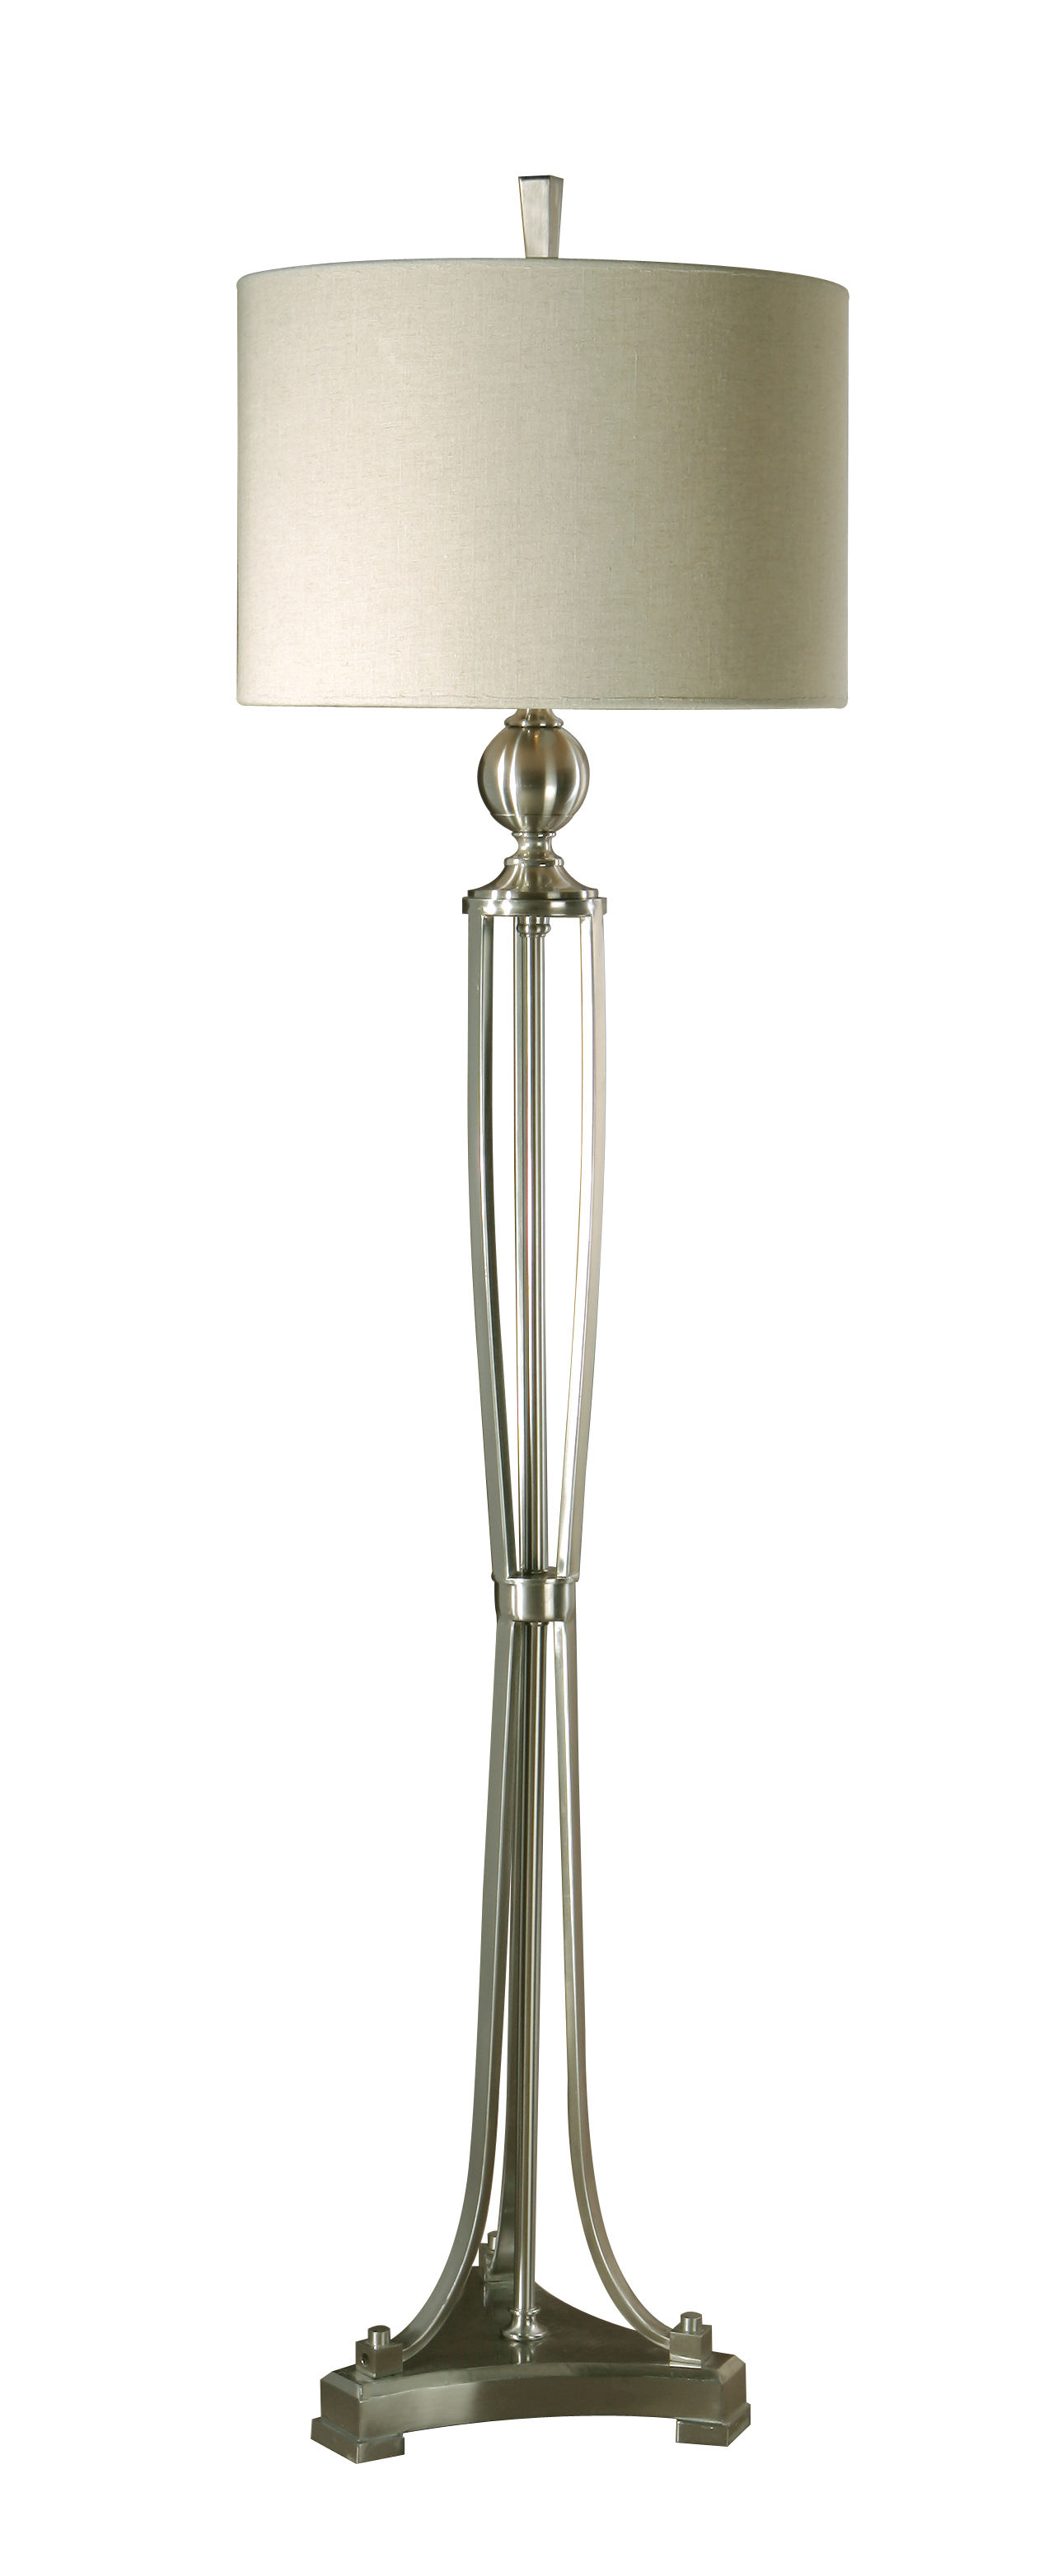 Uttermost 28523 1 Brushed Nickel Metal, Discontinued Uttermost Floor Lamps